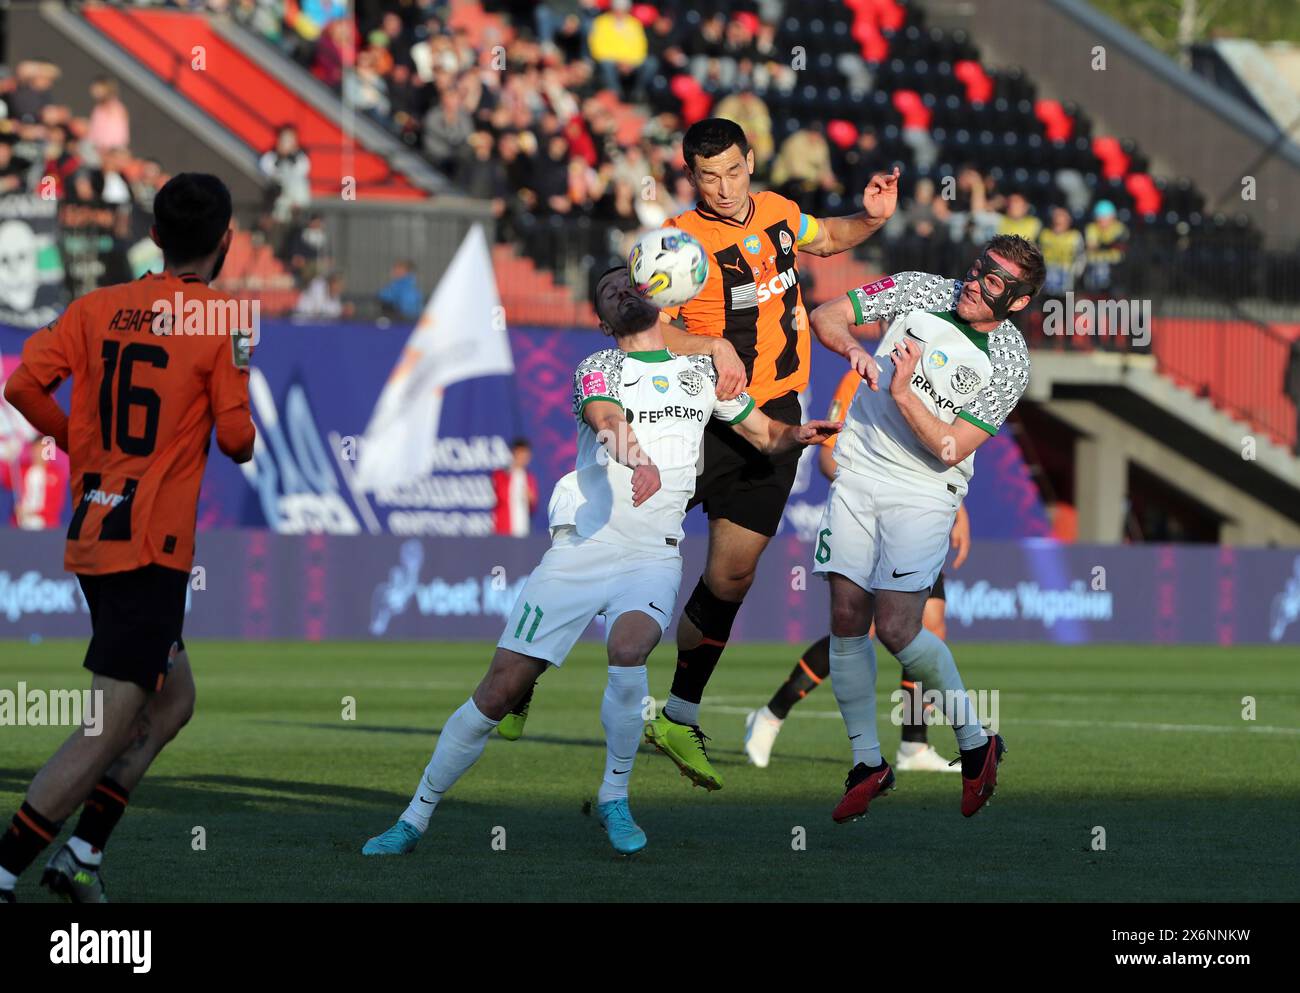 RIVNE, UKRAINE - MAY 15, 2024 - Midfielder Taras Stepanenko (C) of FC Shakhtar Donetsk is seen in action with players of FC Vorskla Poltava during the 2023/24 Ukrainian Cup final match at the Avanhard Stadium, Rivne, western Ukraine. The Orange-and-Blacks claimed a 2-1 win over their rivals from Poltava and took home the Ukrainian Cup for the 14th time. On May 11, the Miners won the 2023/24 Ukrainian Premier League title early by beating FC Dynamo Kyiv 1-0 in Lviv. Thus, the Donetsk team achieved a golden double for the 2023/24 season and became the most decorated club since Ukraine’s independ Stock Photo